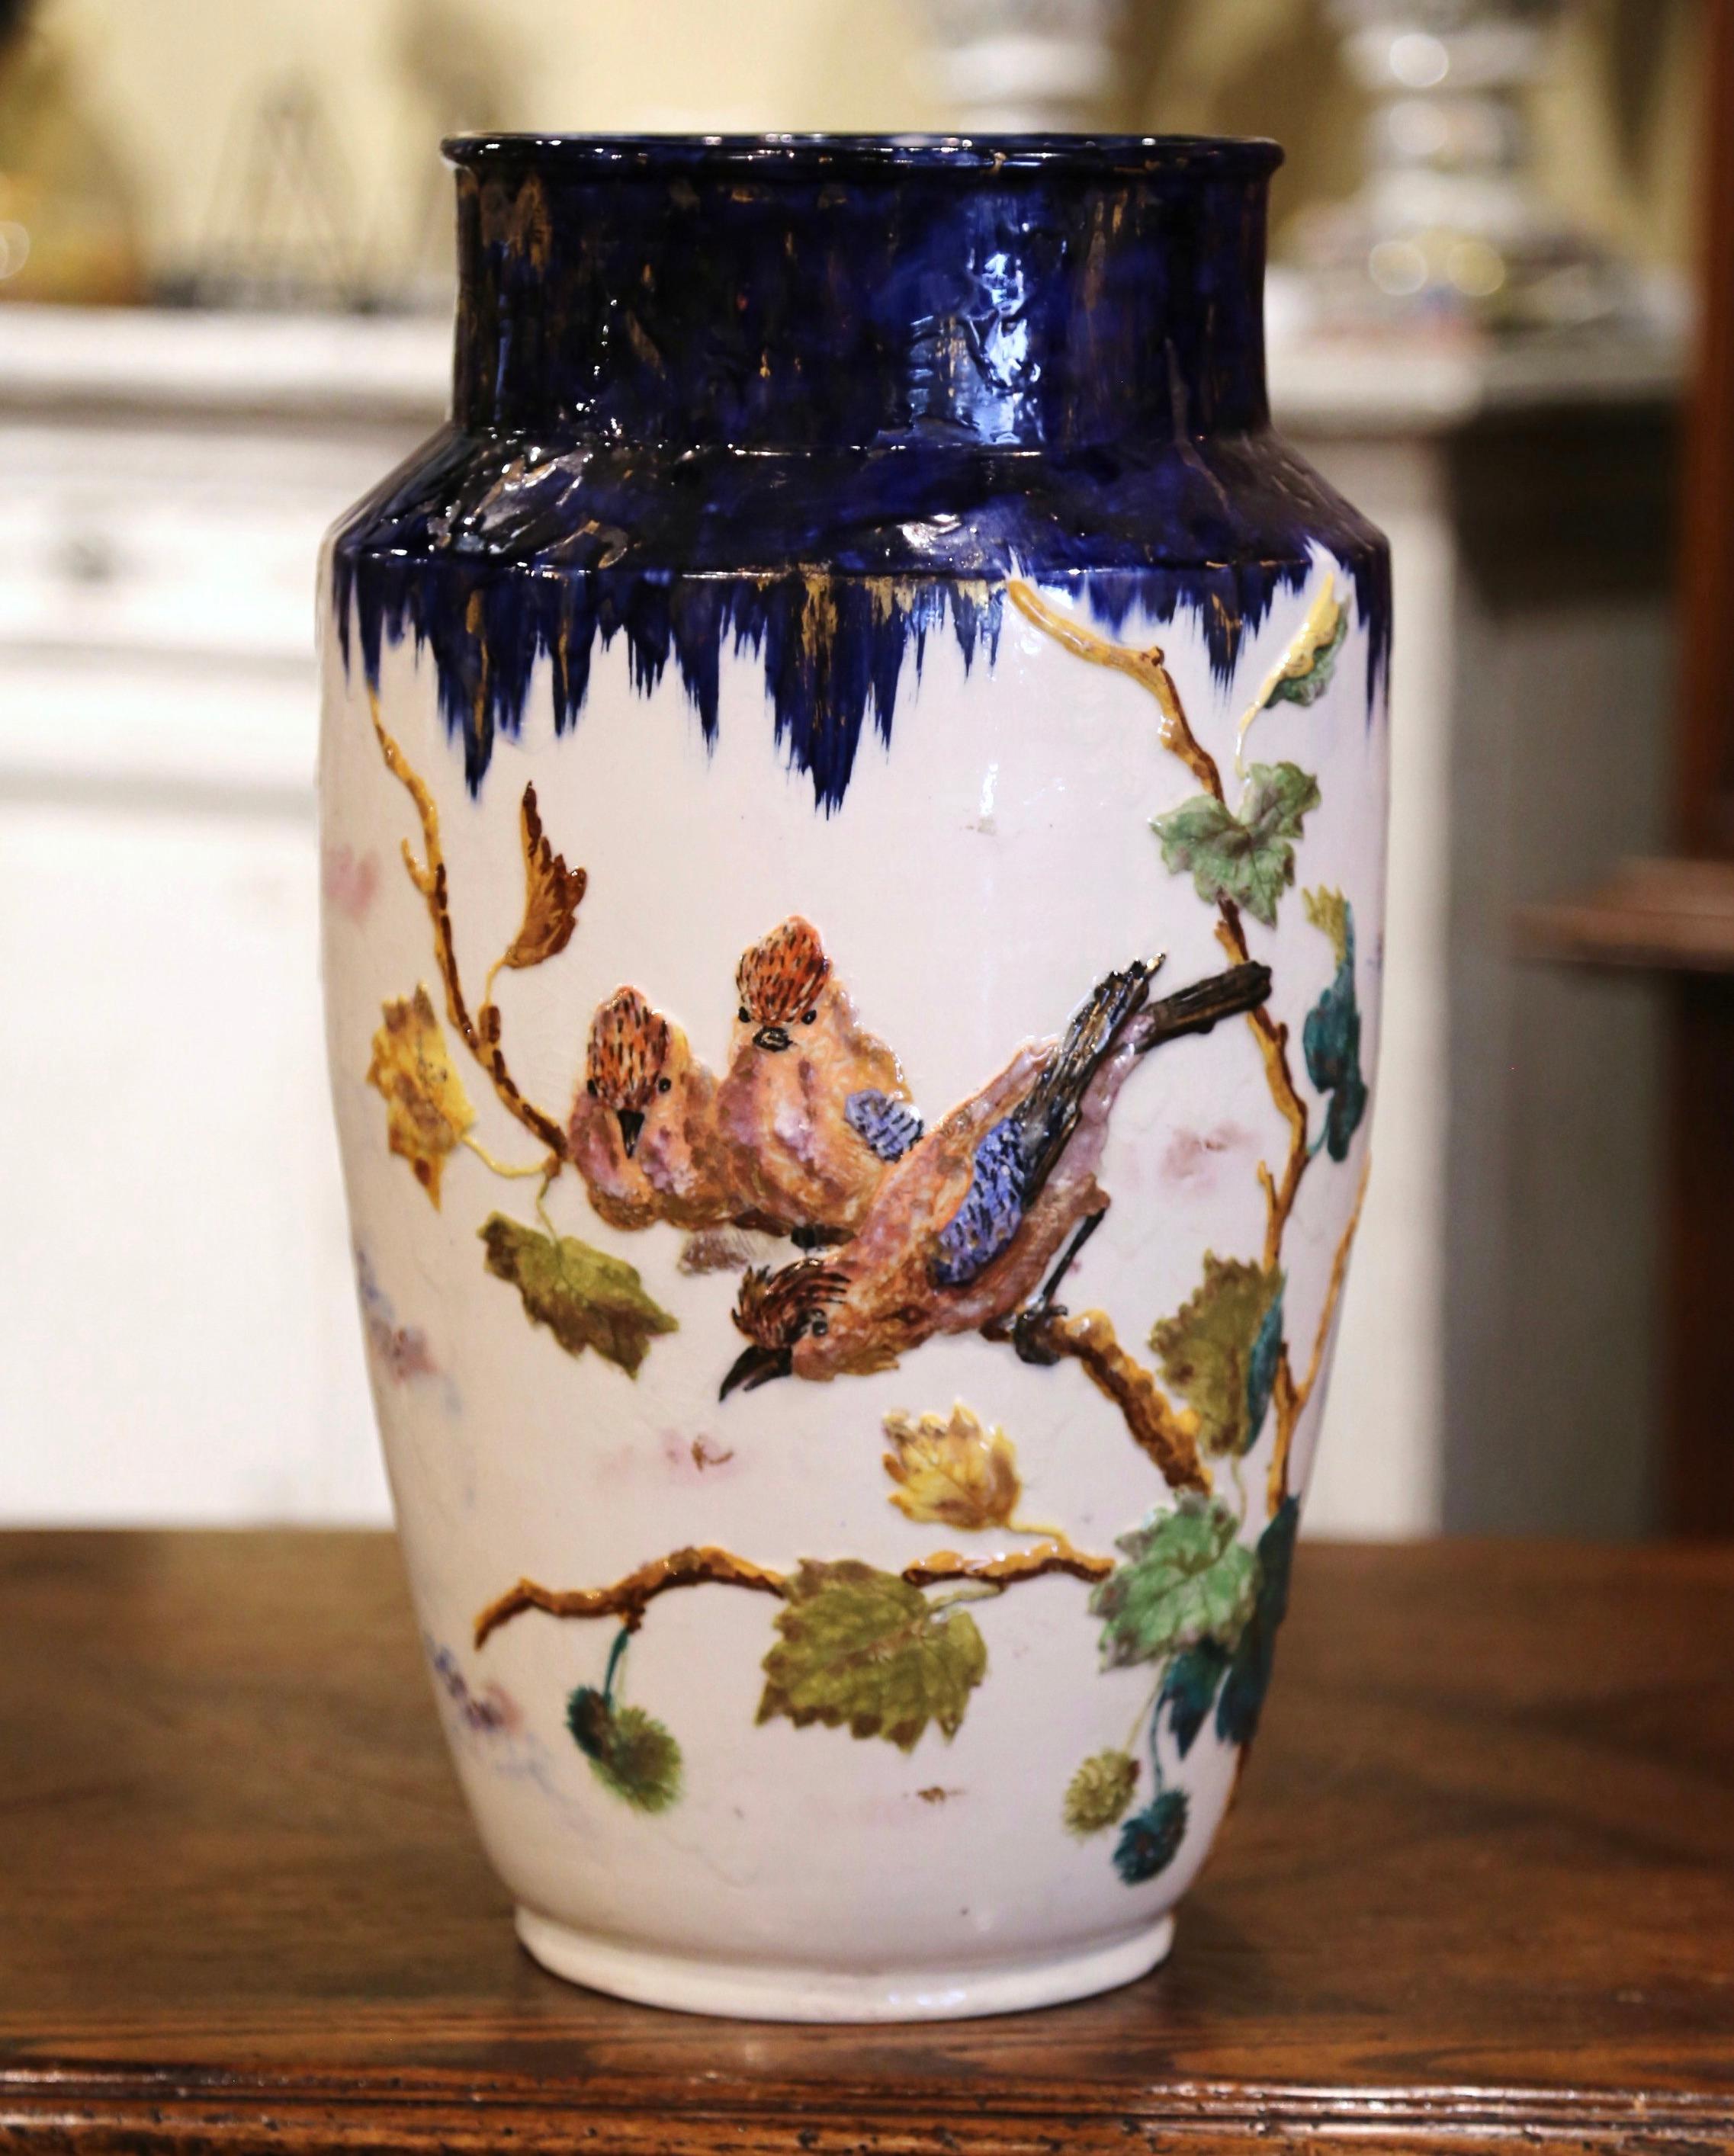 This elegant and colorful antique vase was created in Longchamp, Burgundy, circa 1890, round in shape with high sloping shoulders and body tapered towards the base, the tall ceramic vessel features hand painted bird and foliage motifs in the blue,